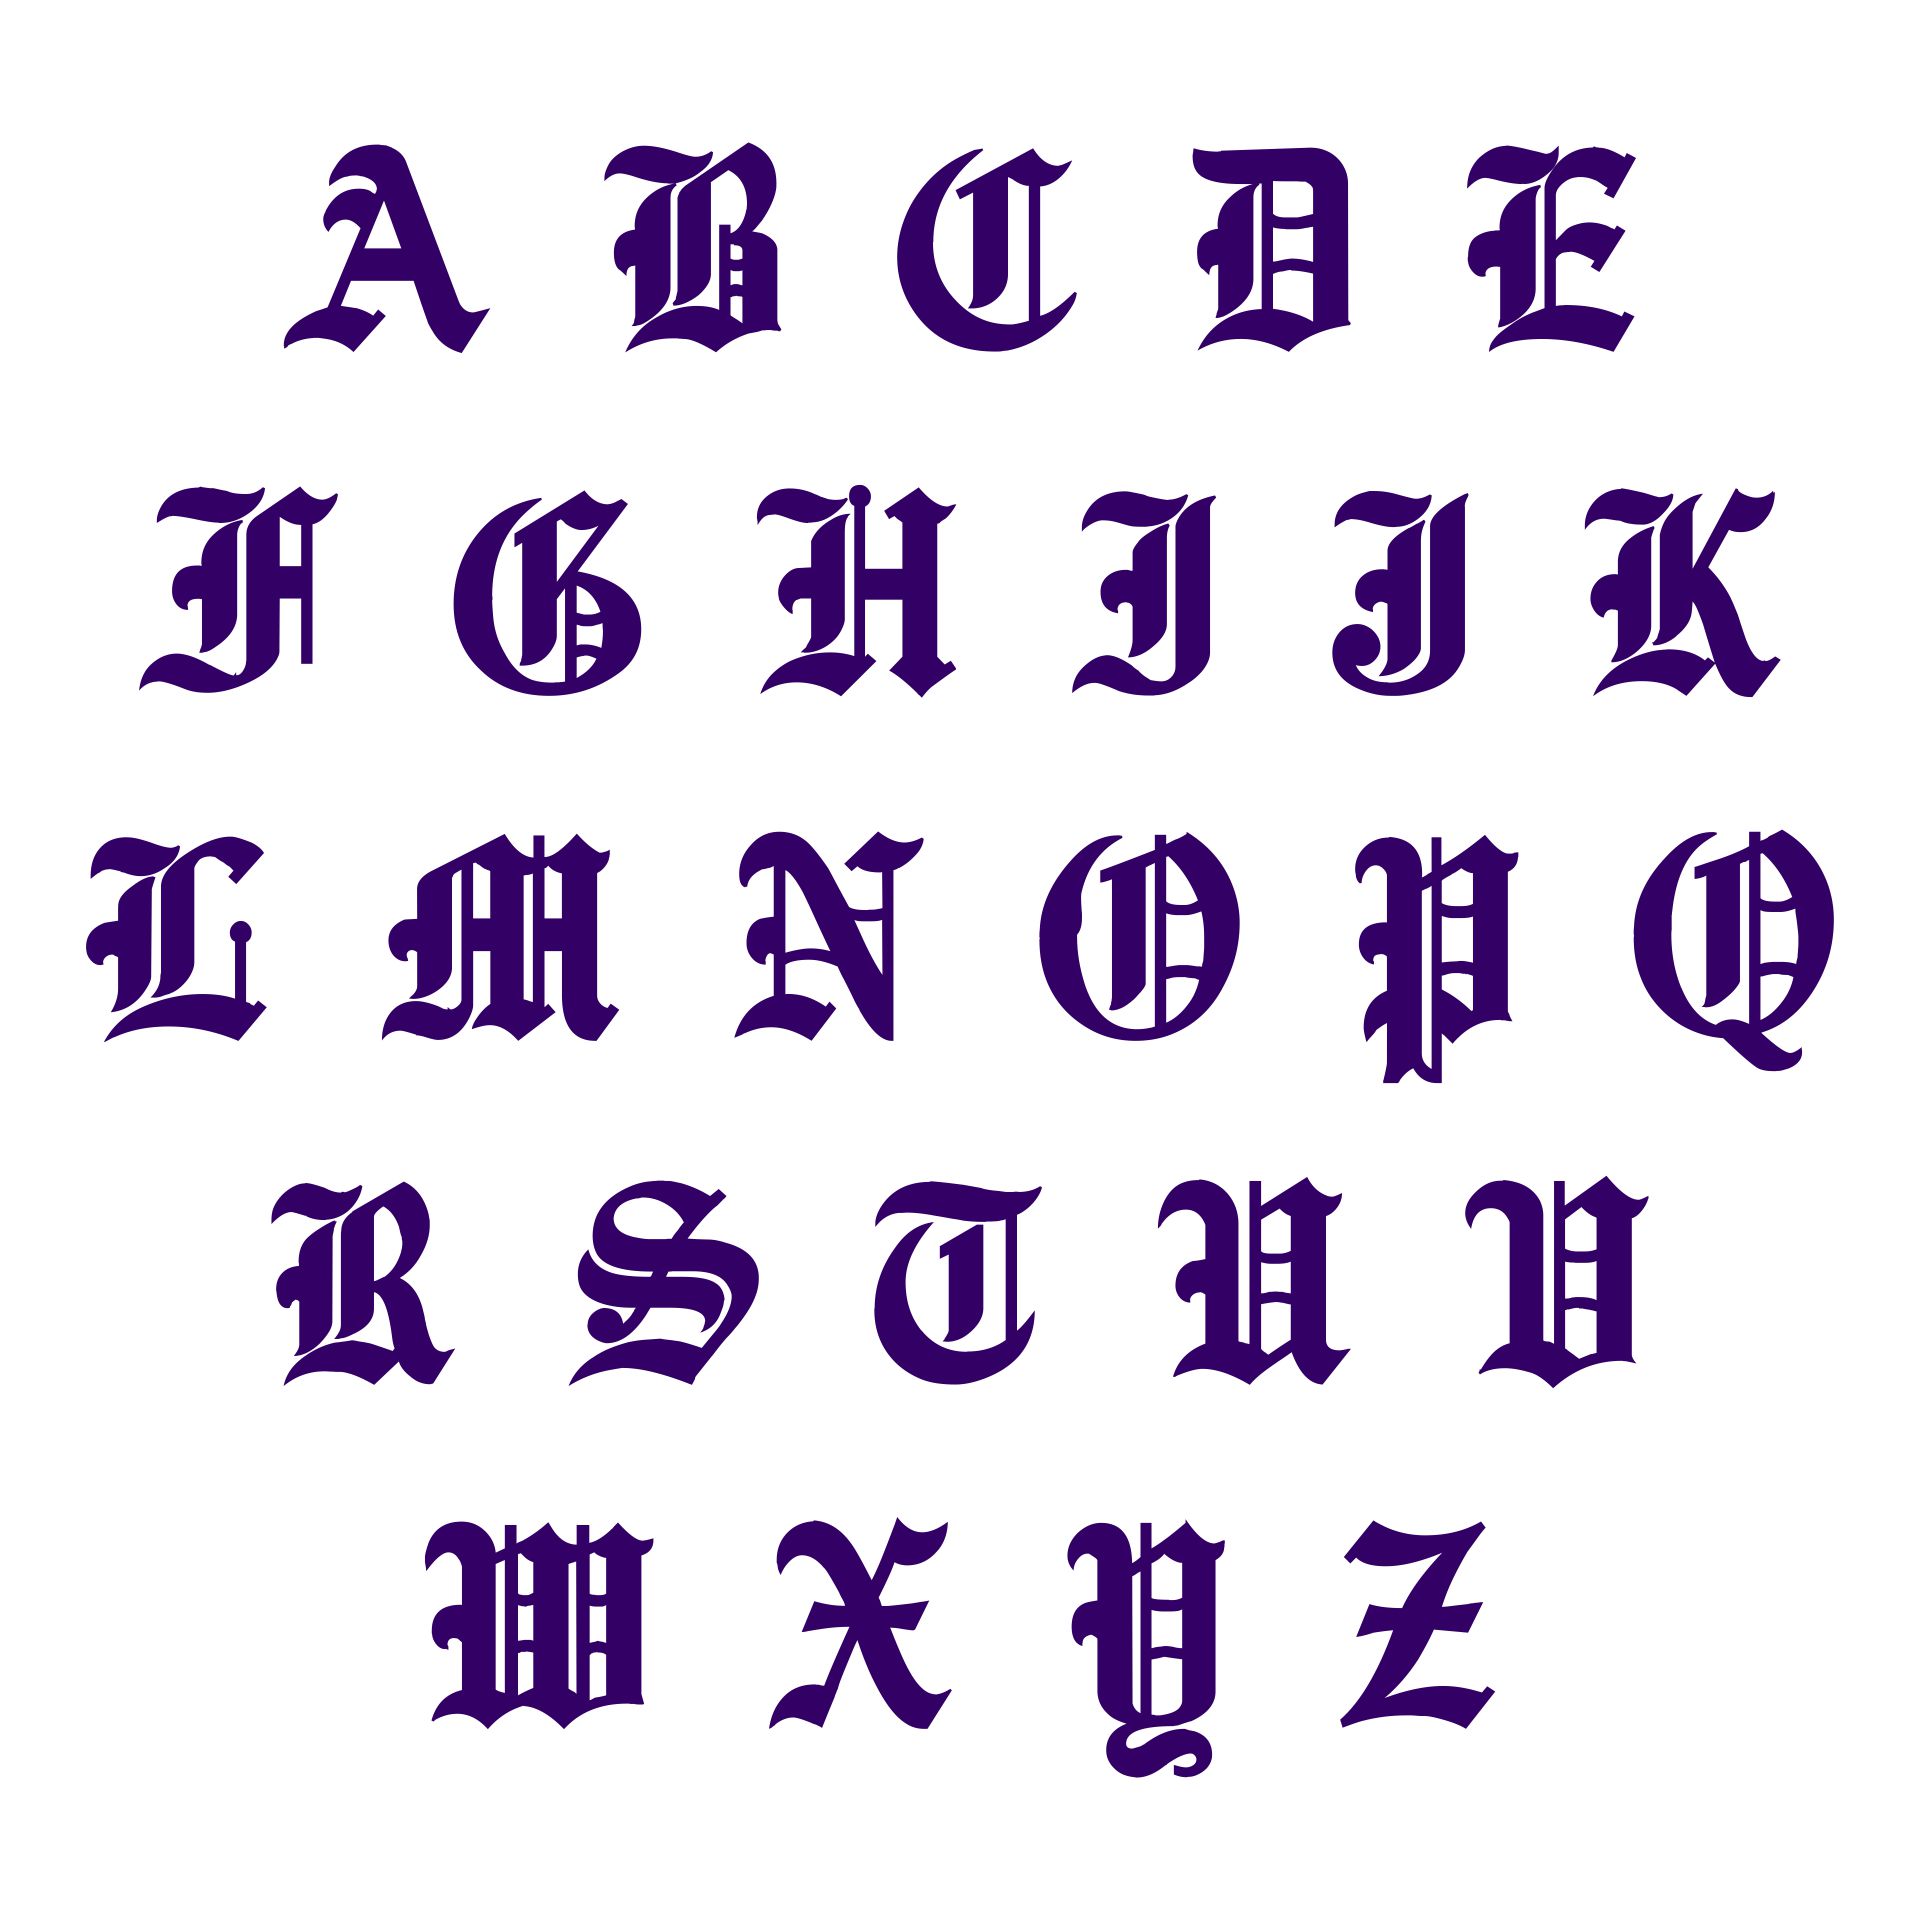 10-best-printable-old-english-alphabet-a-z-pdf-for-free-at-printablee